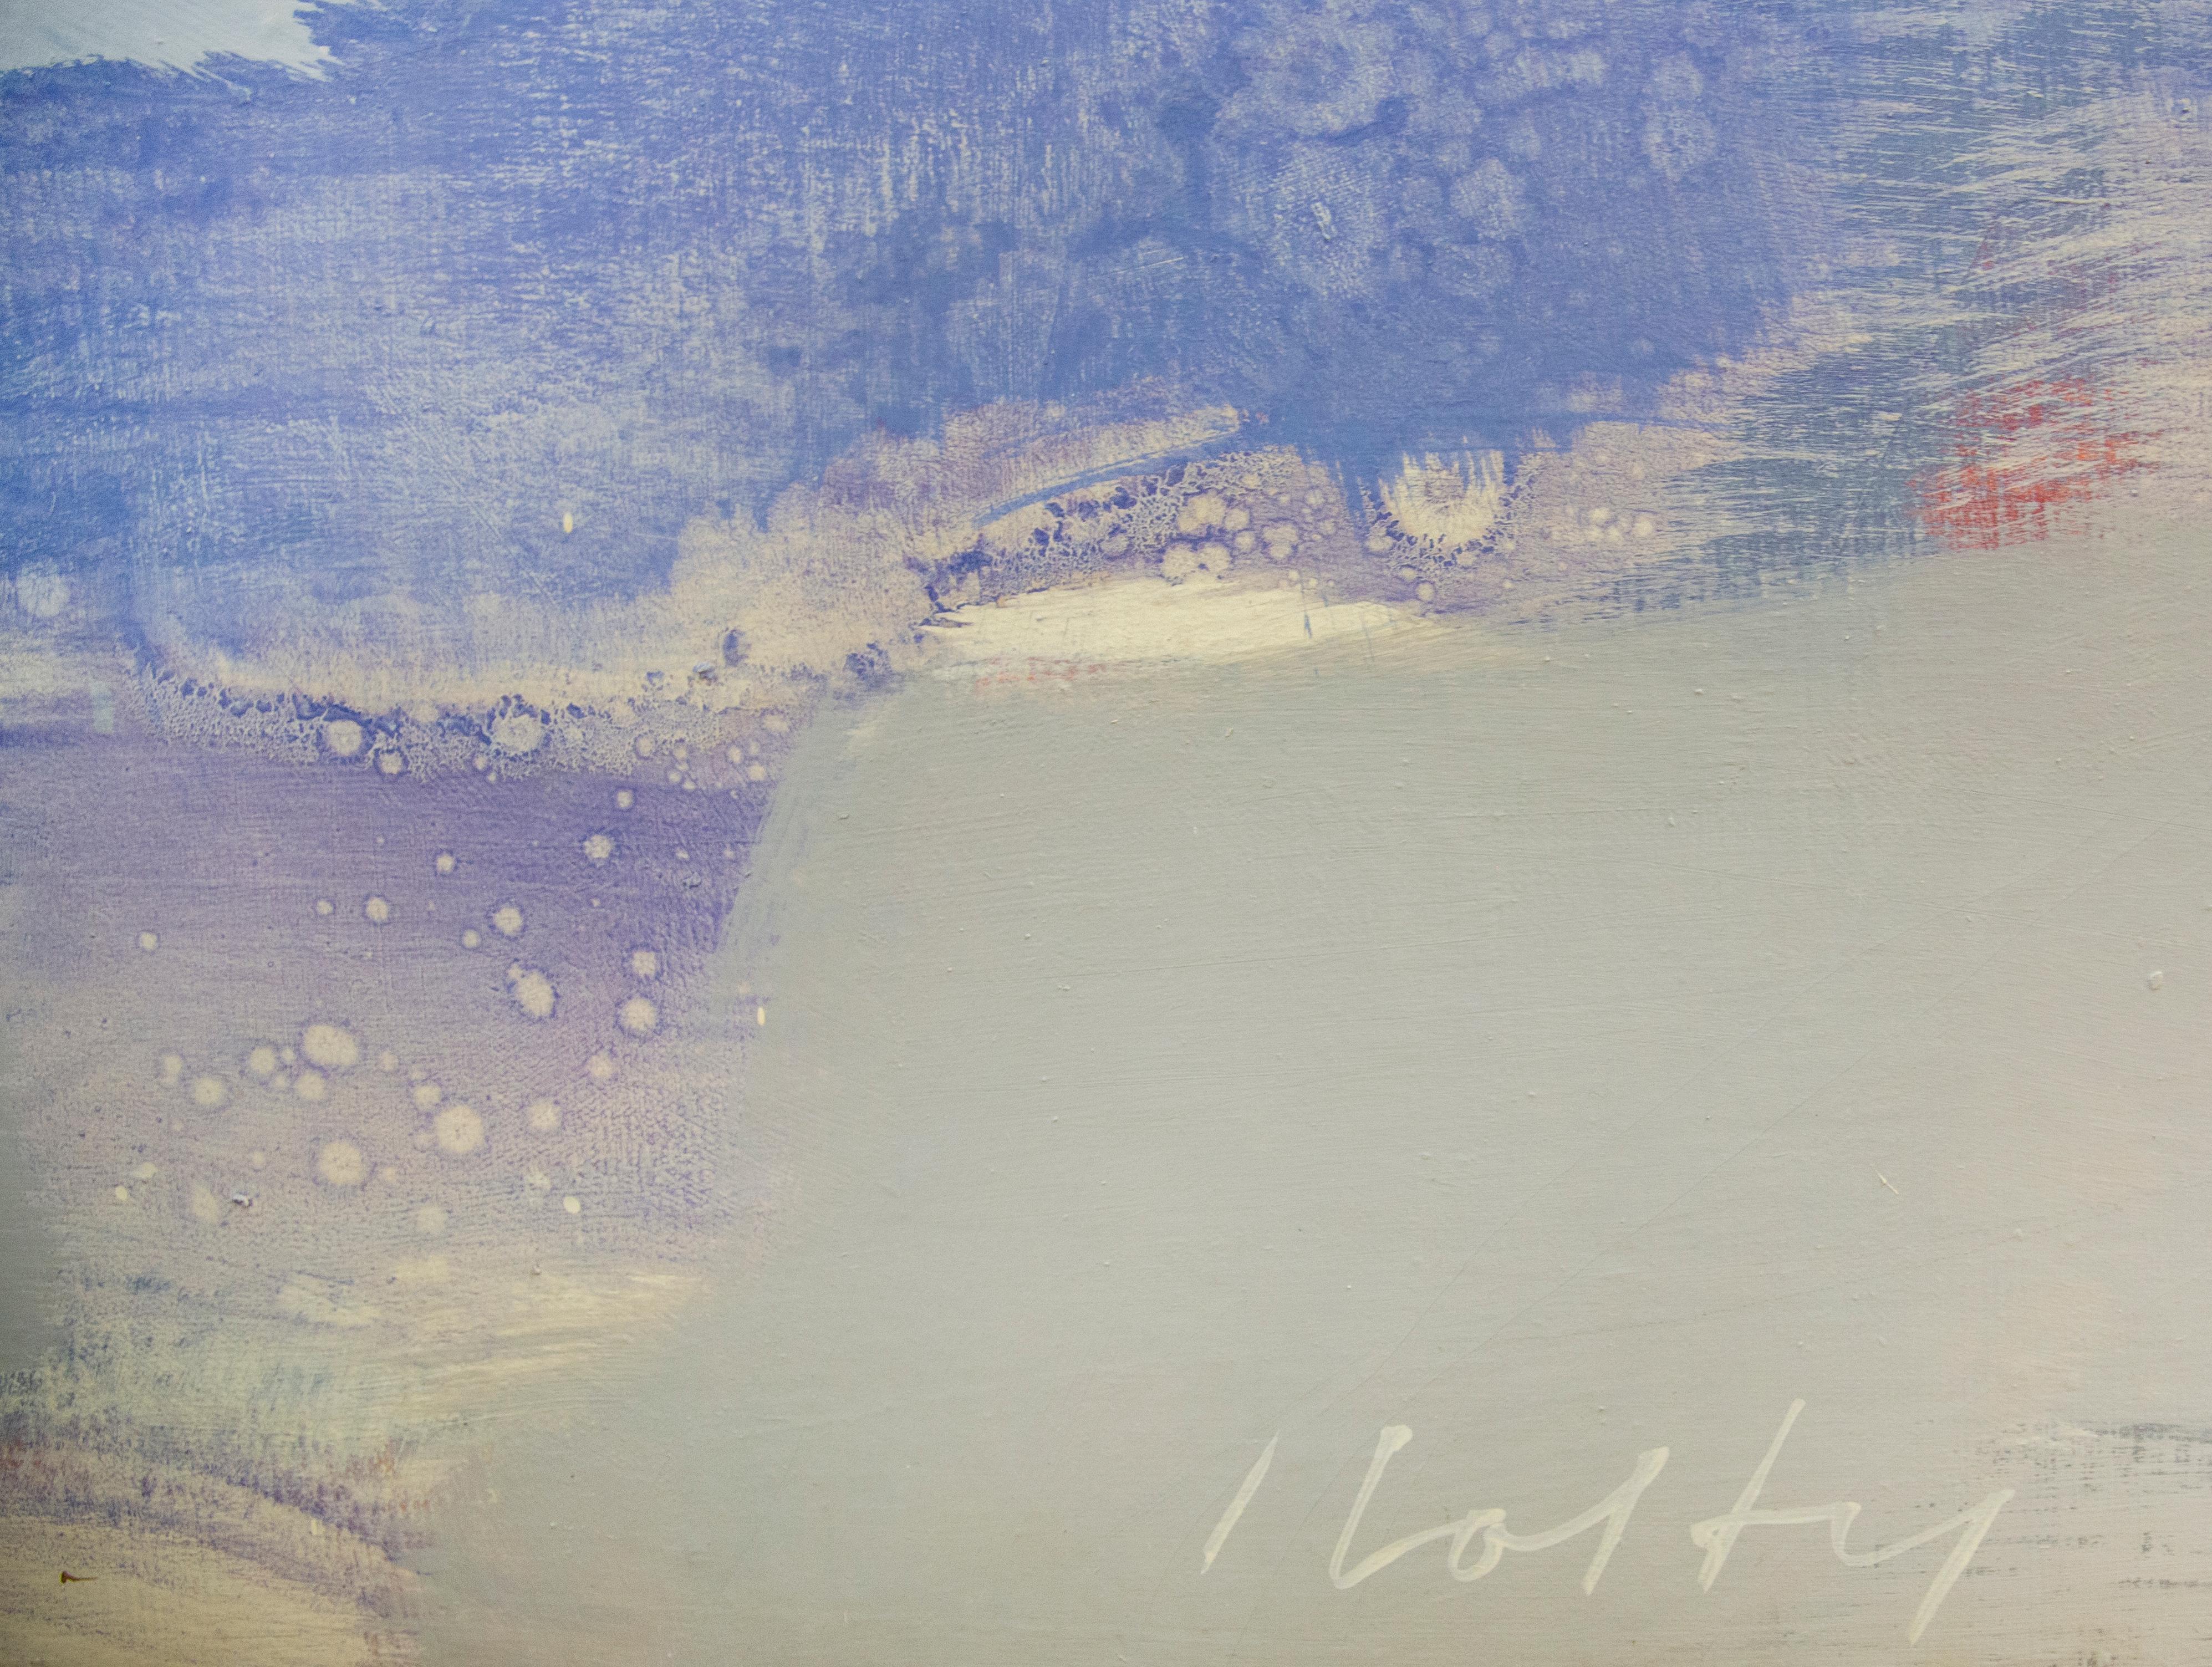 During some periods of Holty’s abstract painting career, he would allow certain representational forms emerge in his works, as he does with the Moon and sense of clouds and atmosphere in this soft gray and lavender toned work. He uses large swathes